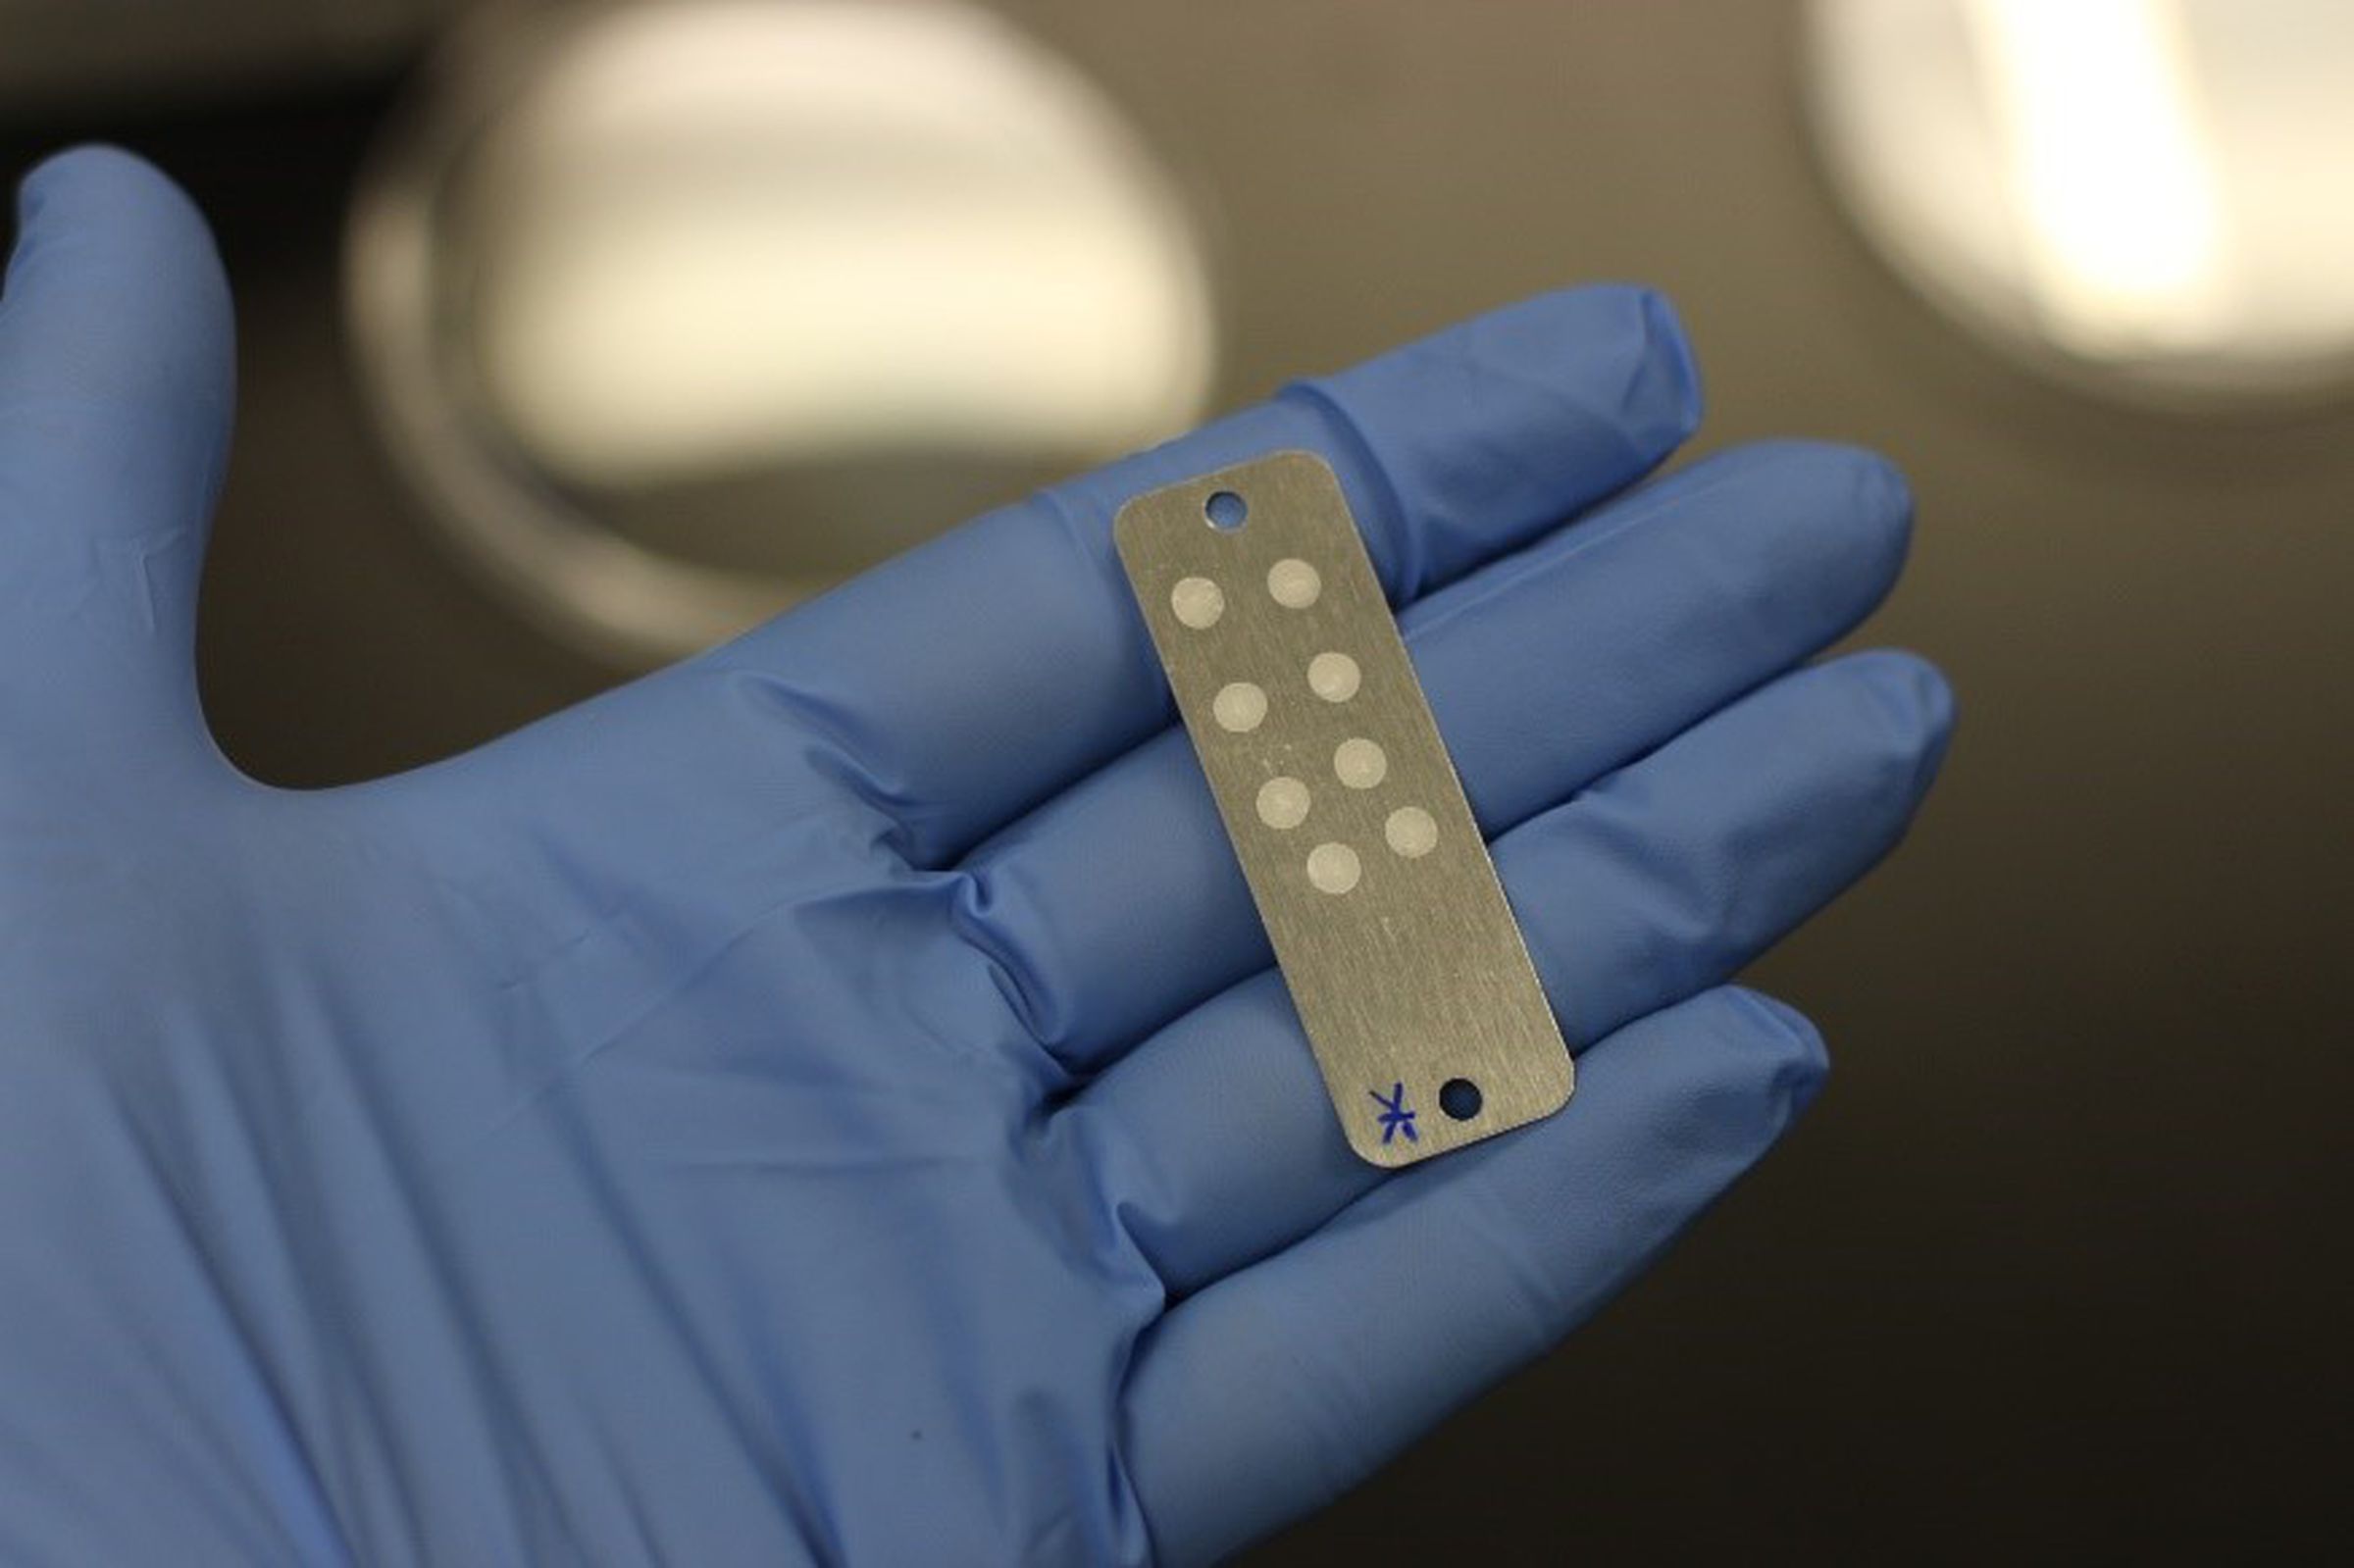 A small metal card used to transport bacteria.